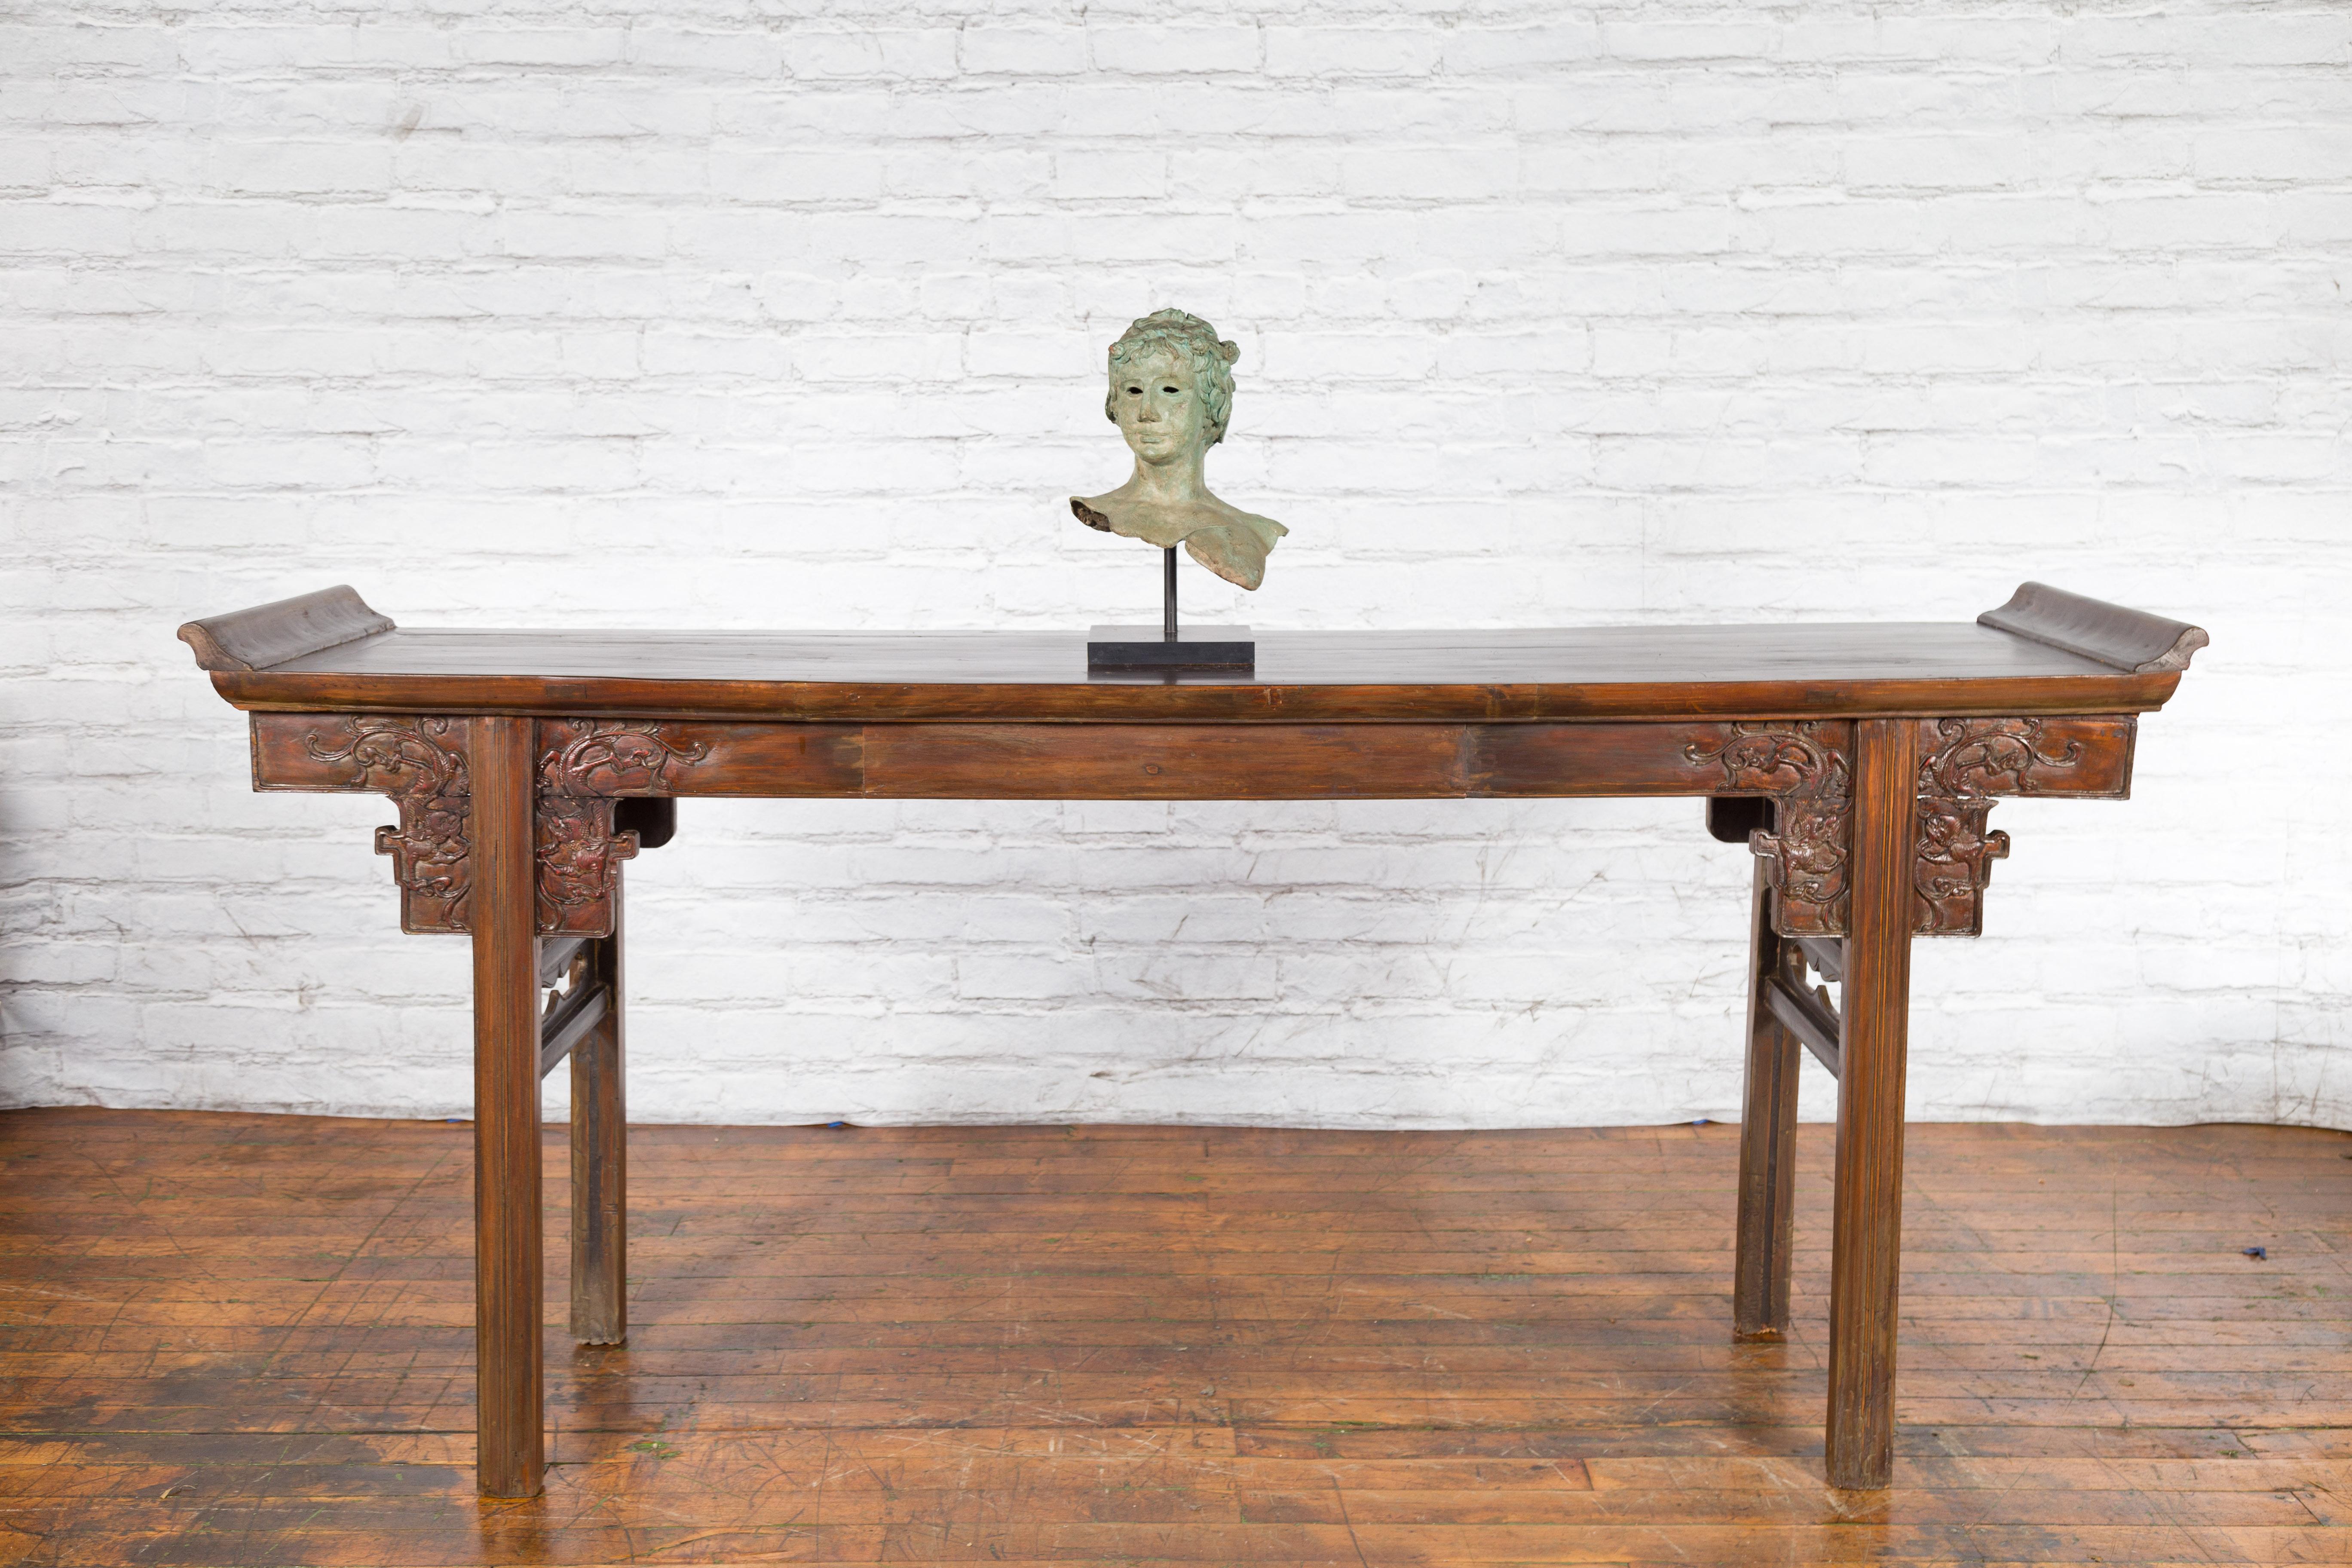 A vintage cast bronze Greco-Roman style bust from the mid 20th century, with custom stand. Created with the traditional technique of the lost-wax (à la cire perdue) which allows for great precision and finesse in the details, this bronze sculpture